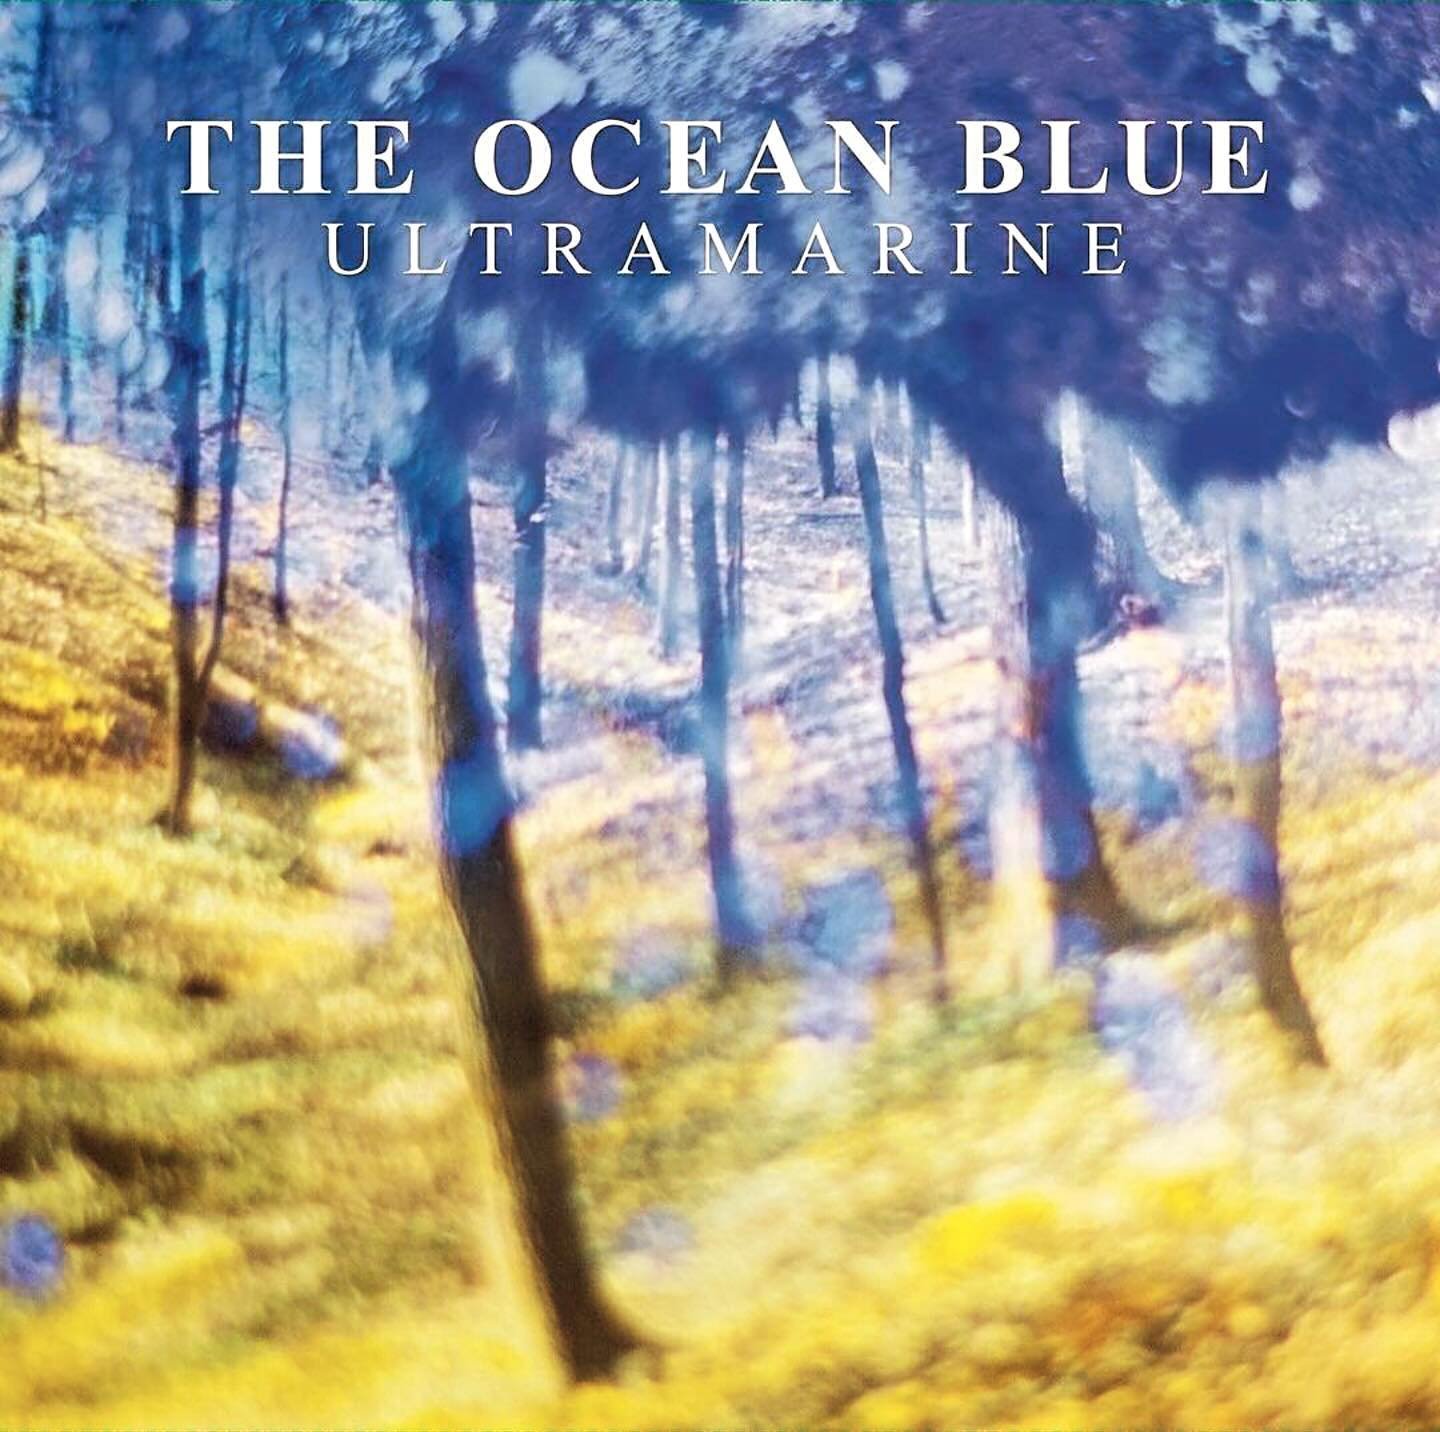 On this day in 2013, Ultramarine was released 🔵🟡